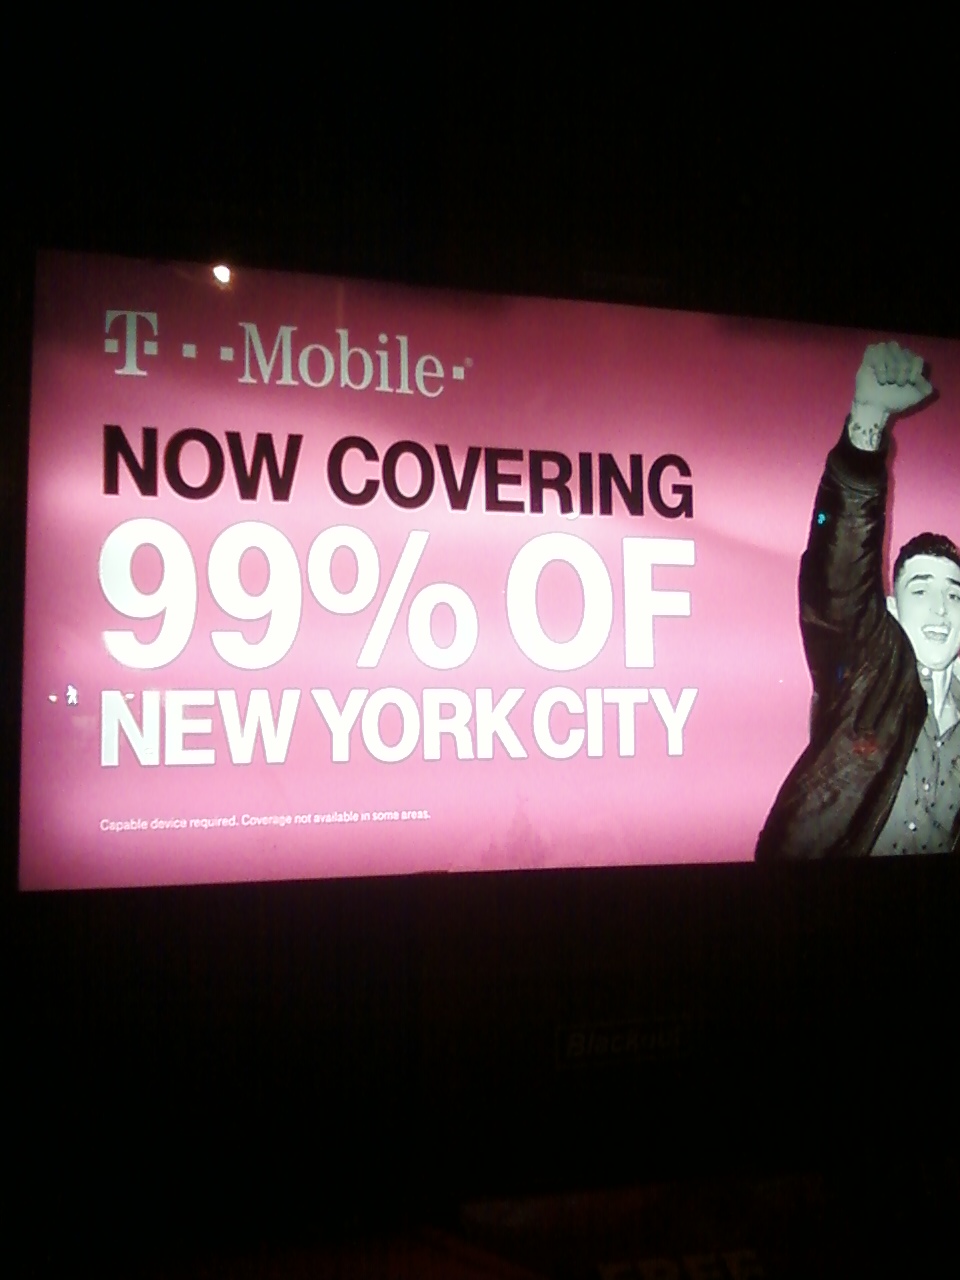 T-Mobile
ad over a west side IRT station in NYC indicating that T-Mobile covers 99
percent of New York City, yet generally it seems coverage is a lot worse.
For further details, please visit www.wirelessnotes.org.